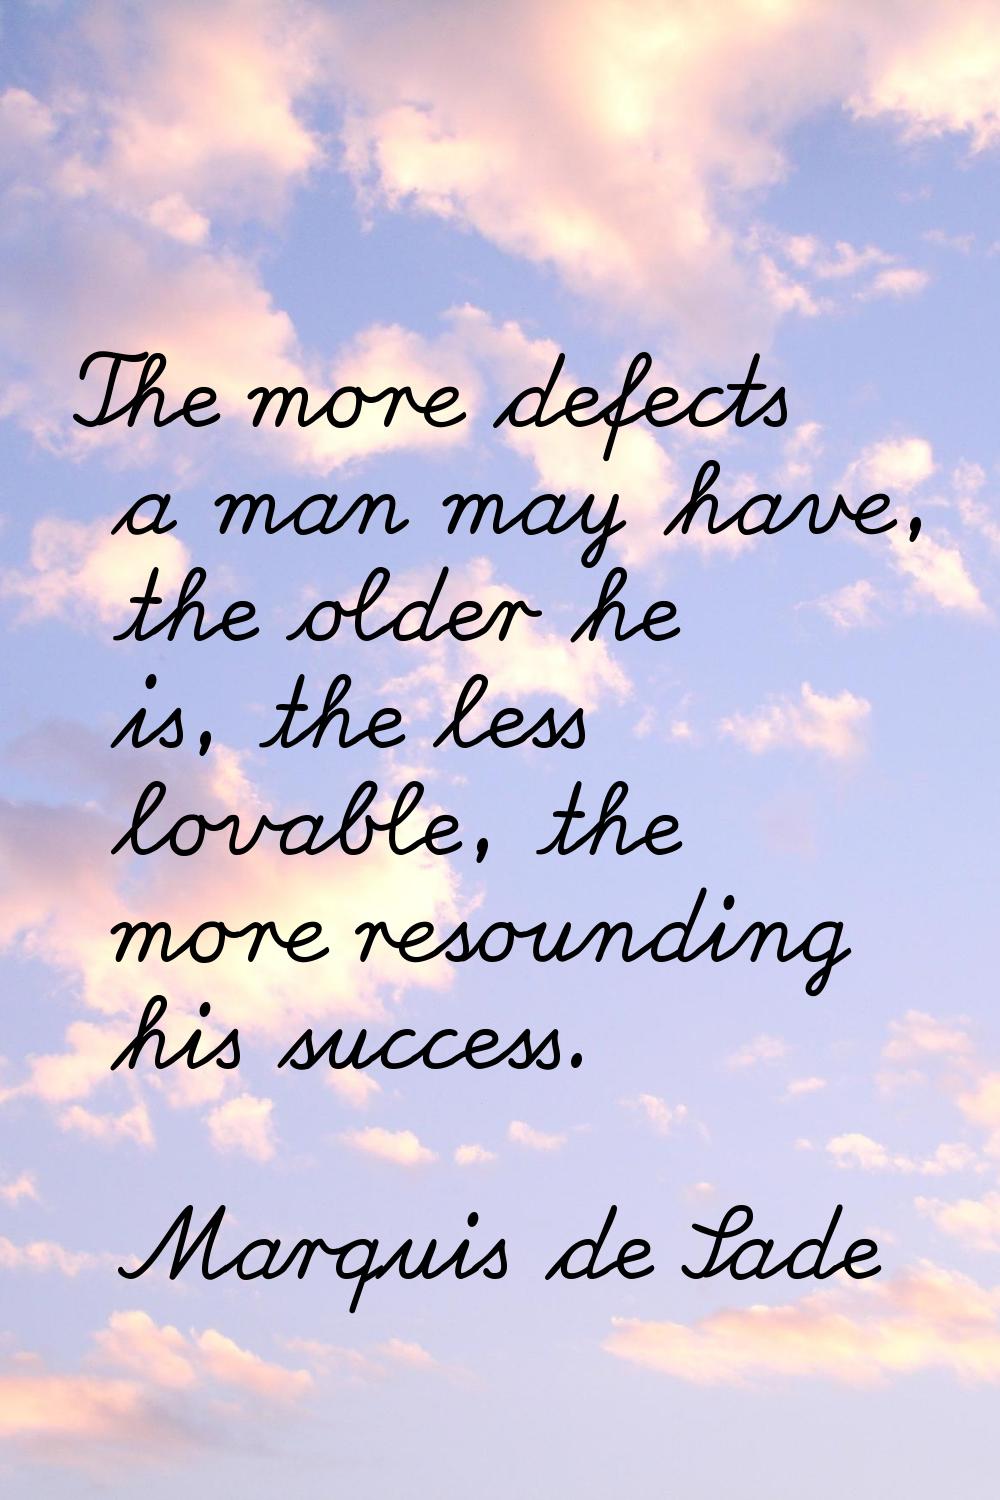 The more defects a man may have, the older he is, the less lovable, the more resounding his success